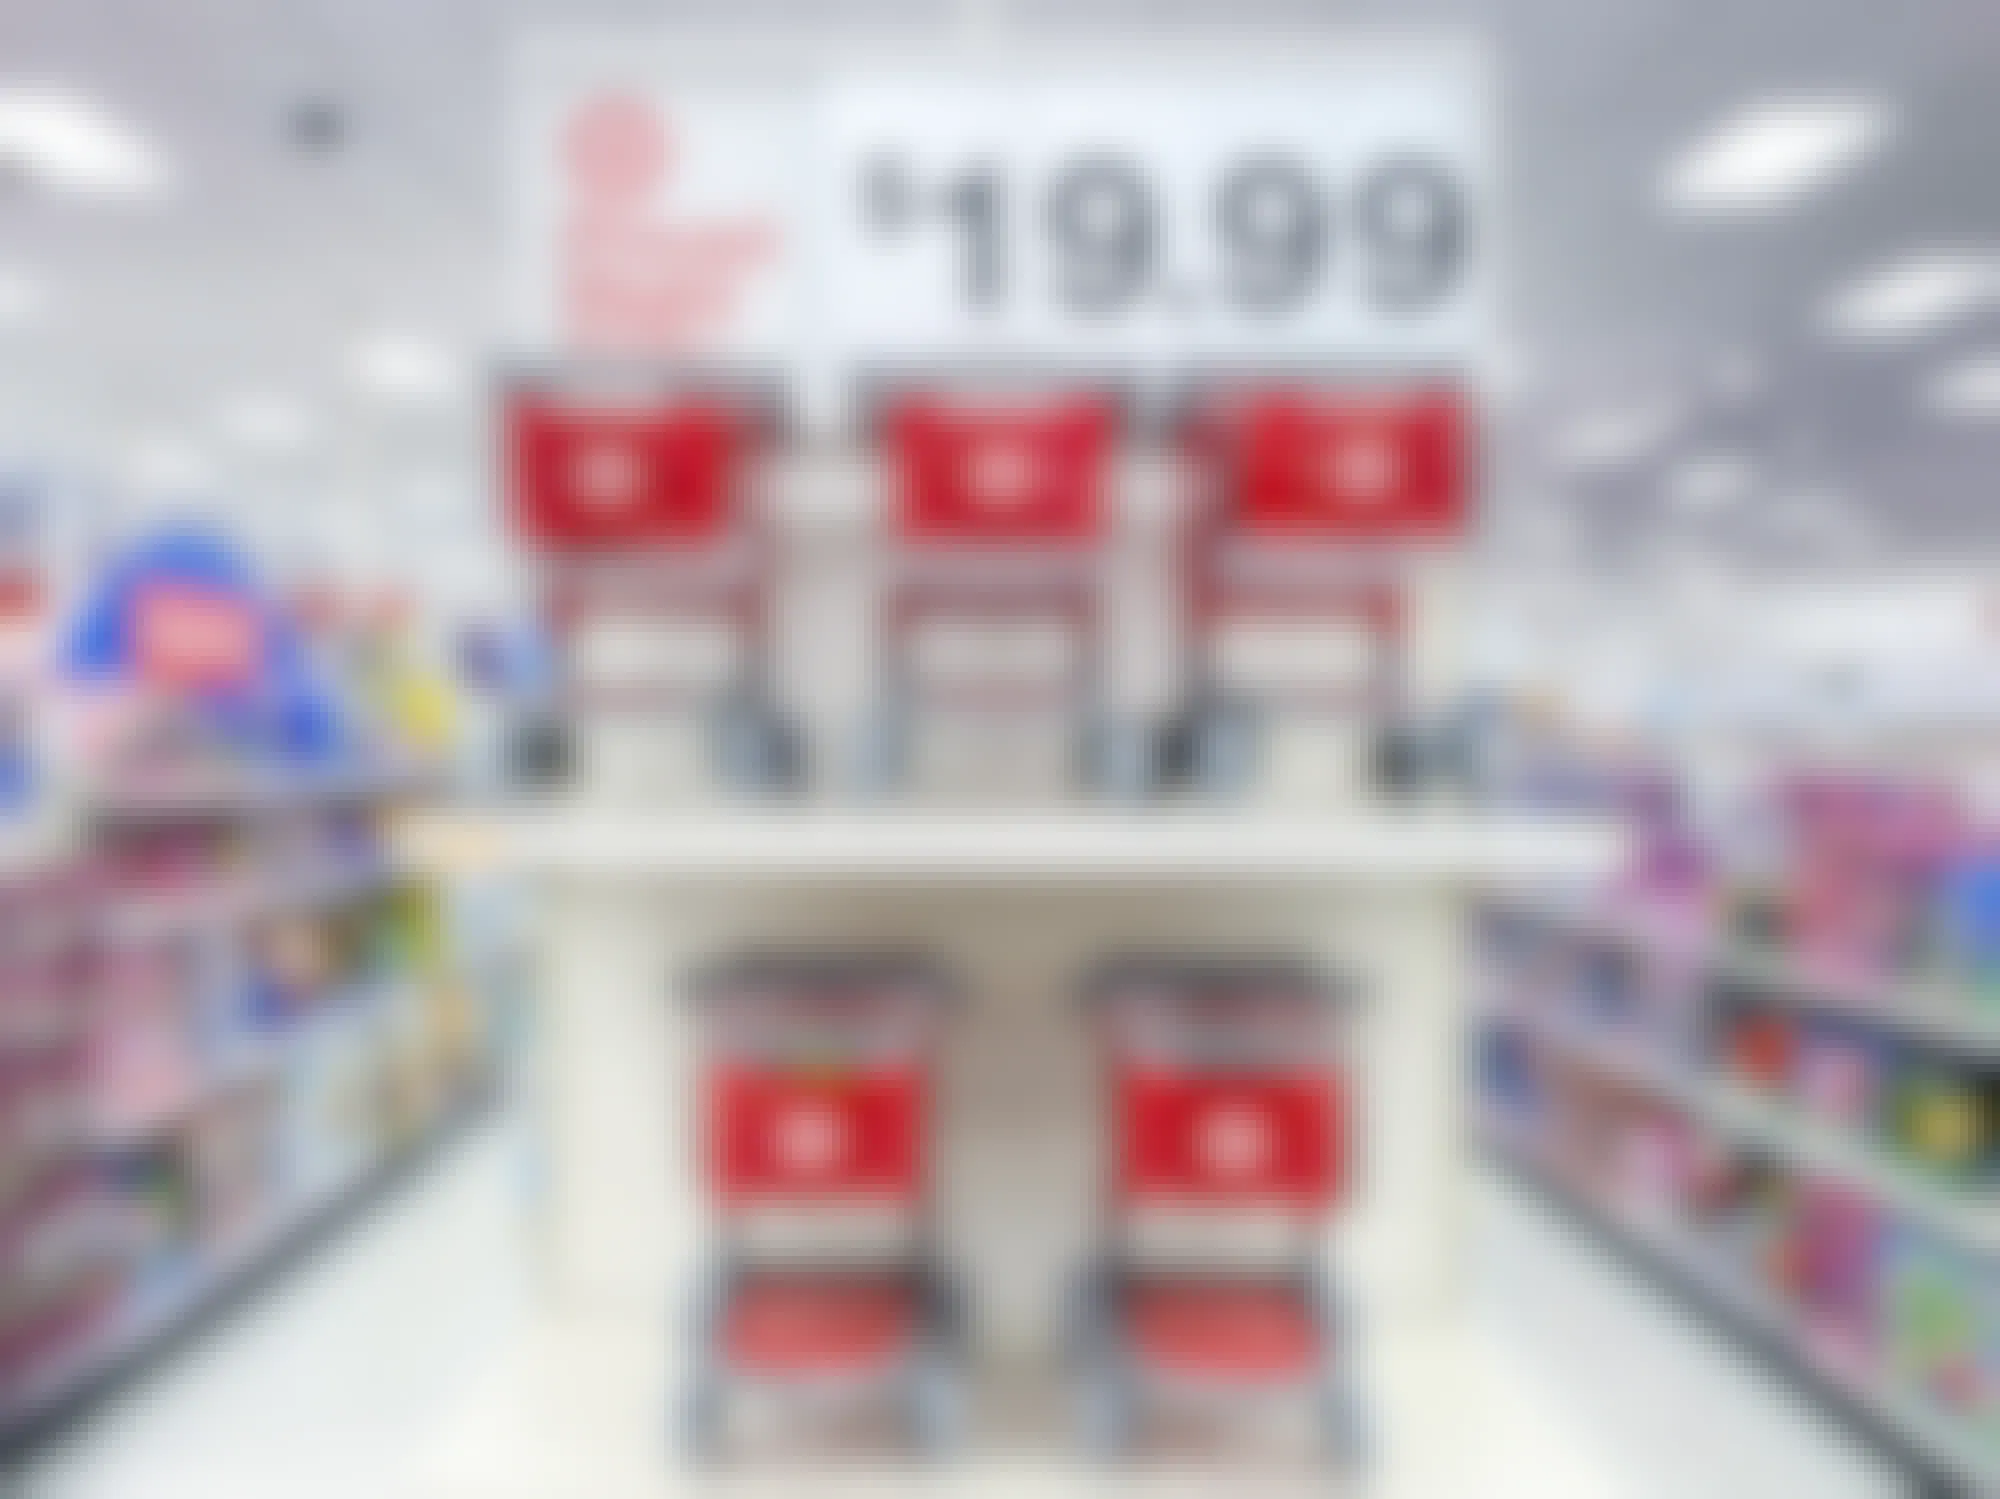 target toy shopping carts on store shelves with $19.99 price sign